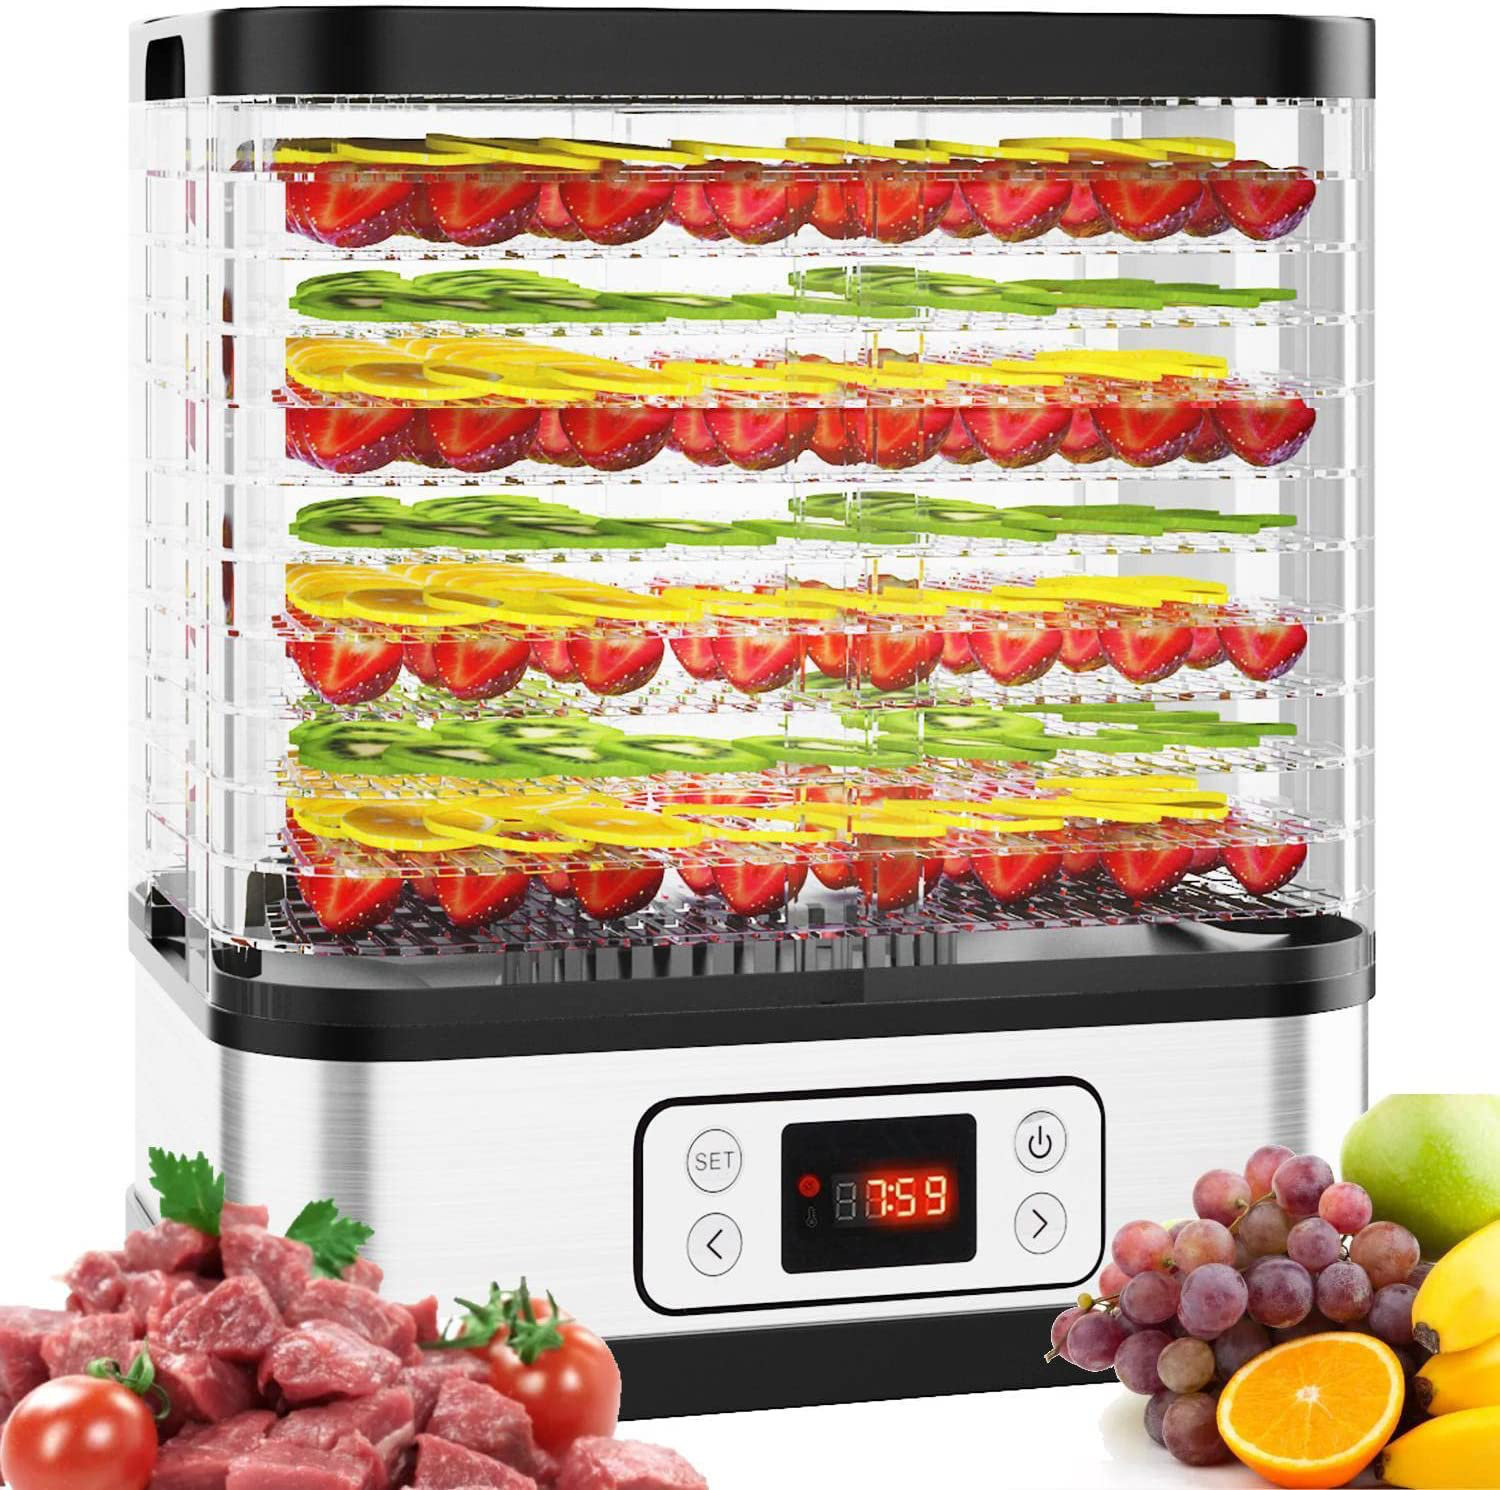 Nesco 5-Tray Food Dehydrator, Expandable up to 7 Trays, 400W, Dishwasher-Safe Parts, Clear Top, White